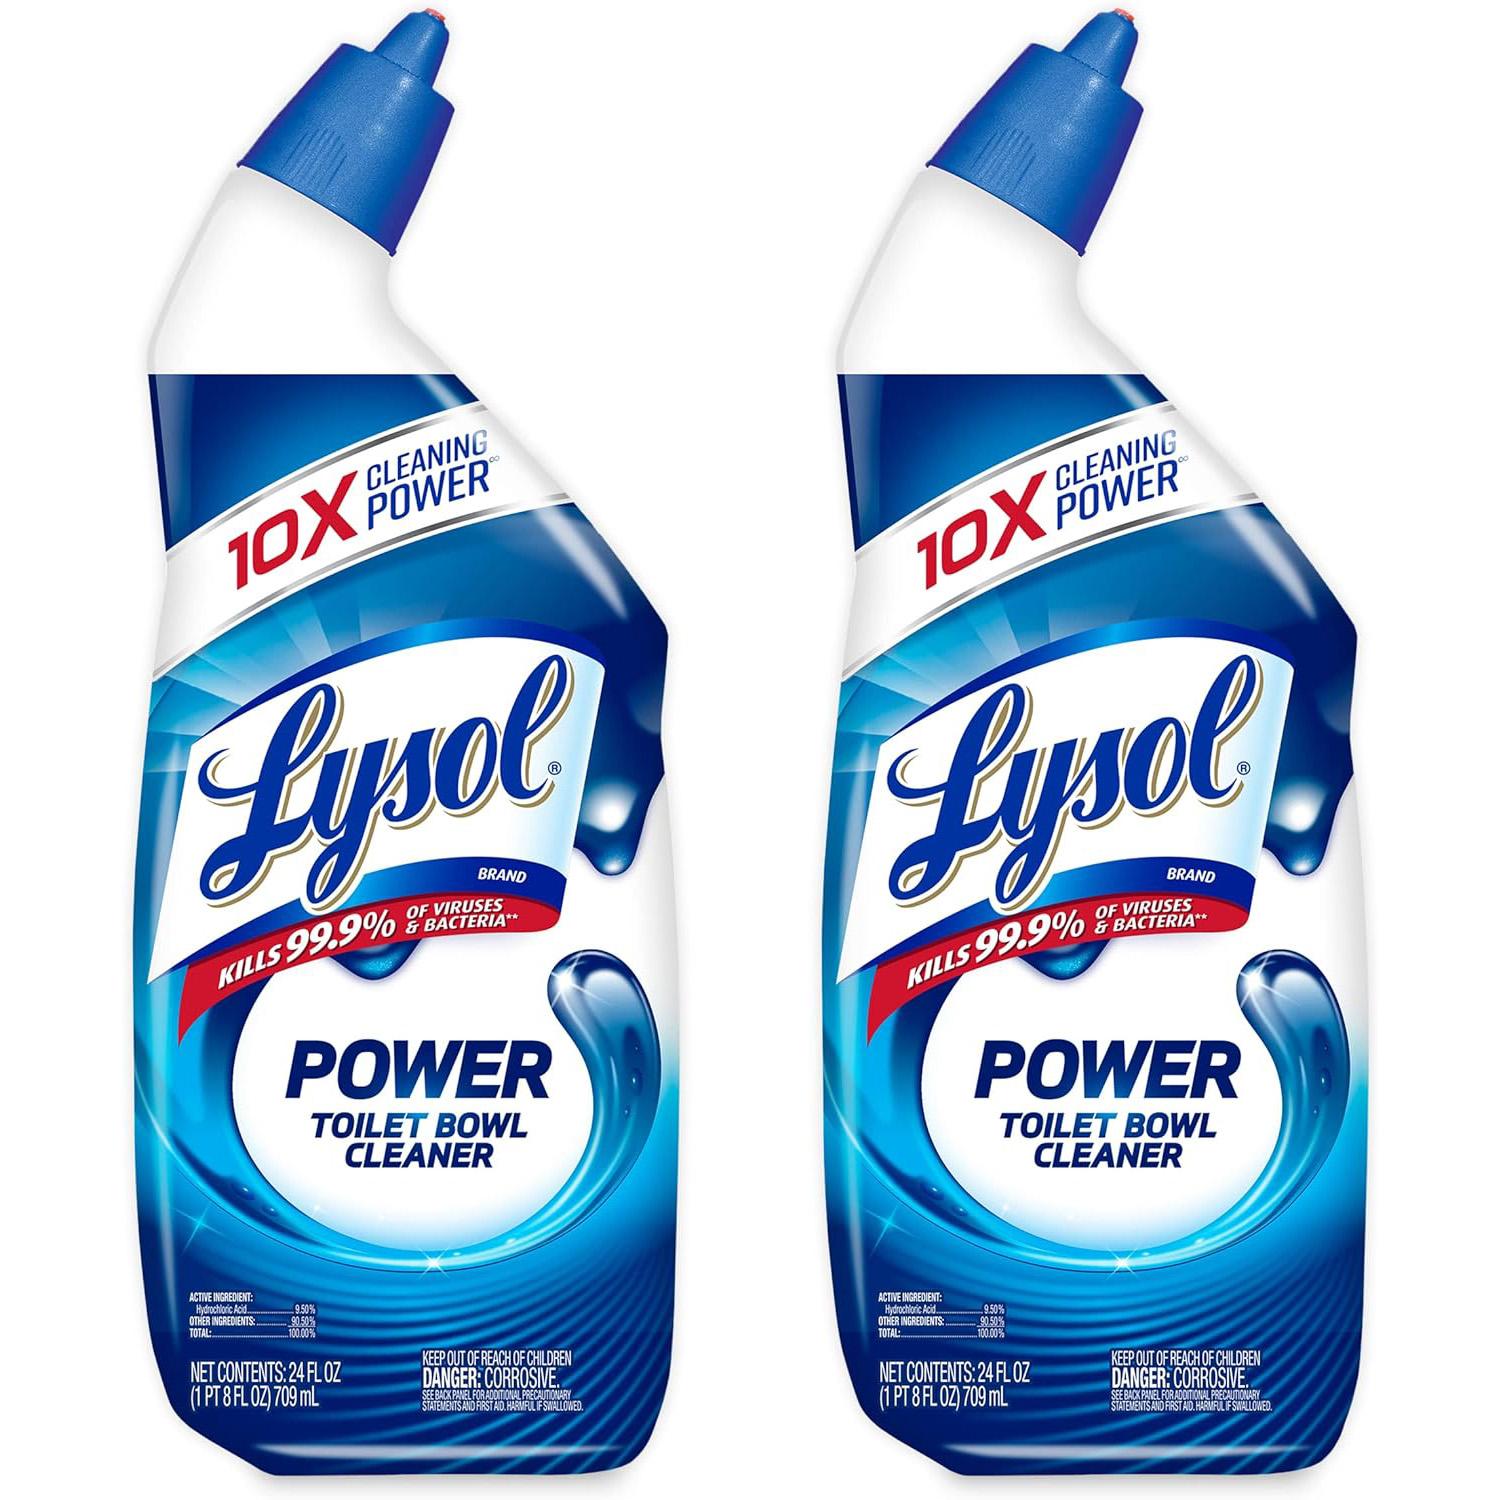 2 Lysol Power Toilet Bowl Cleaner for $2.79 Shipped